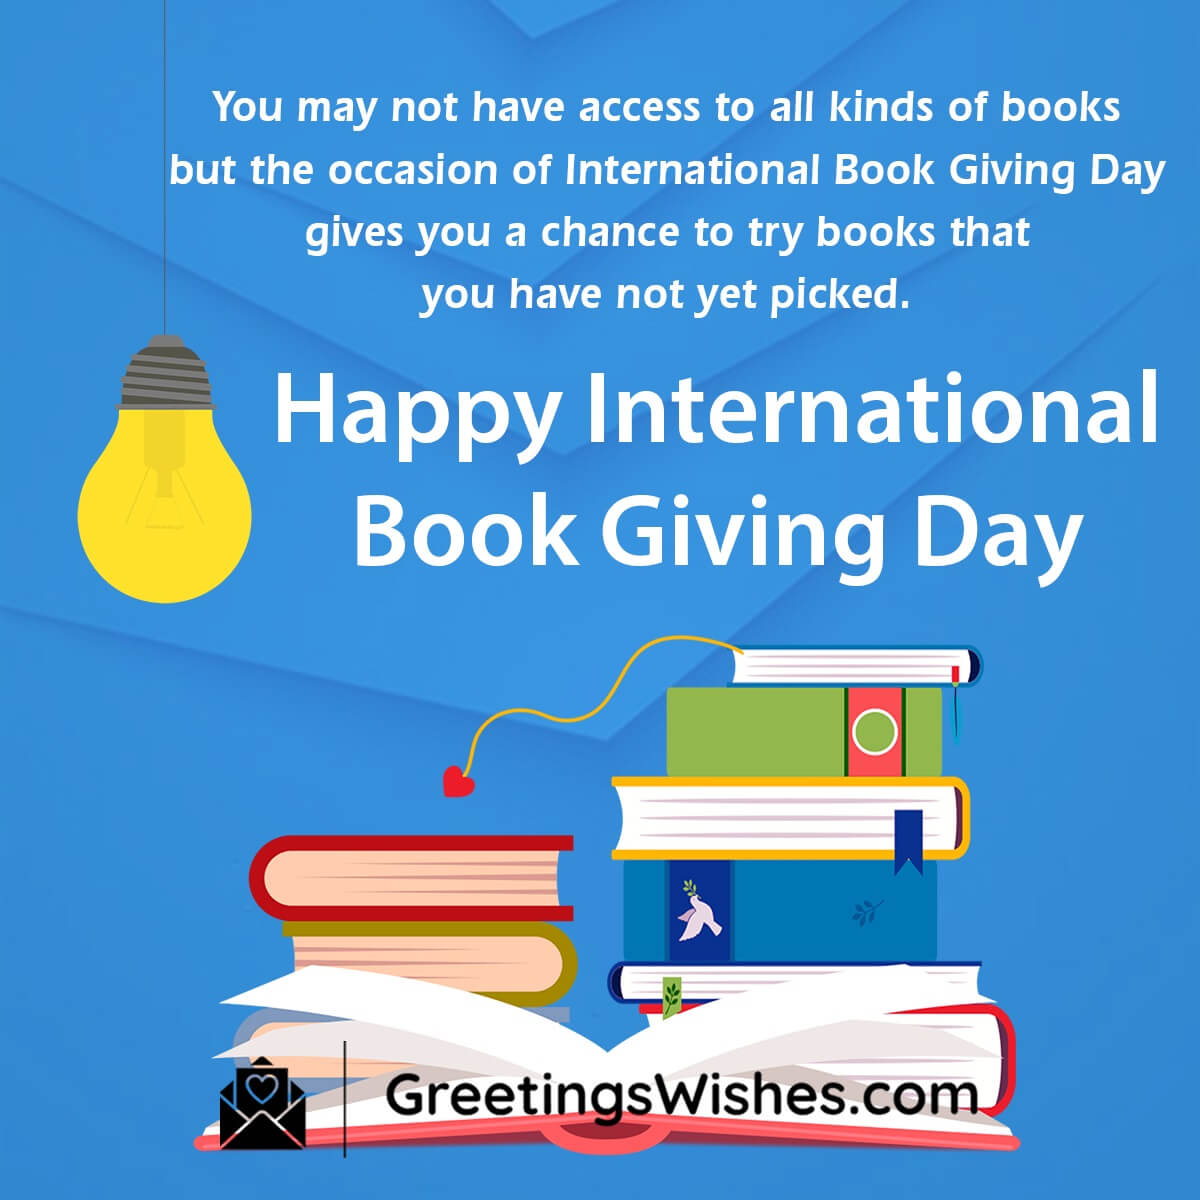 Happy International Book Giving Day Message